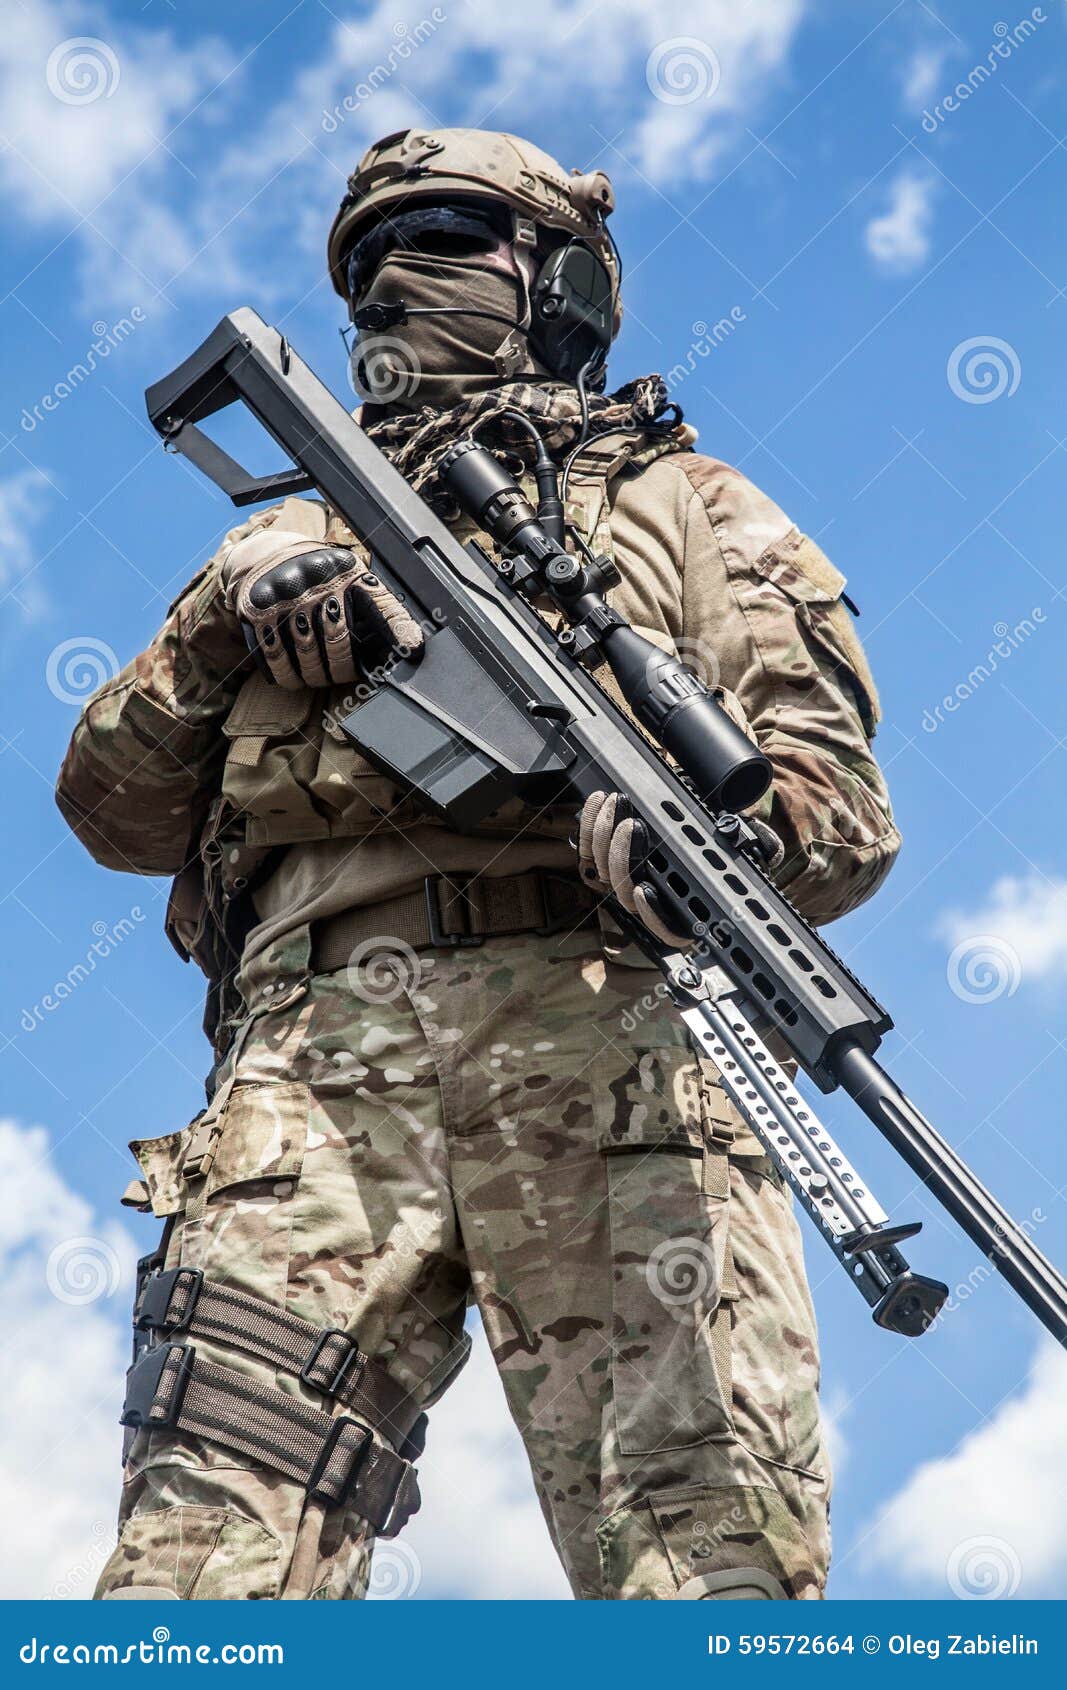 Army ranger sniper stock photo. Image of forces, assault ...